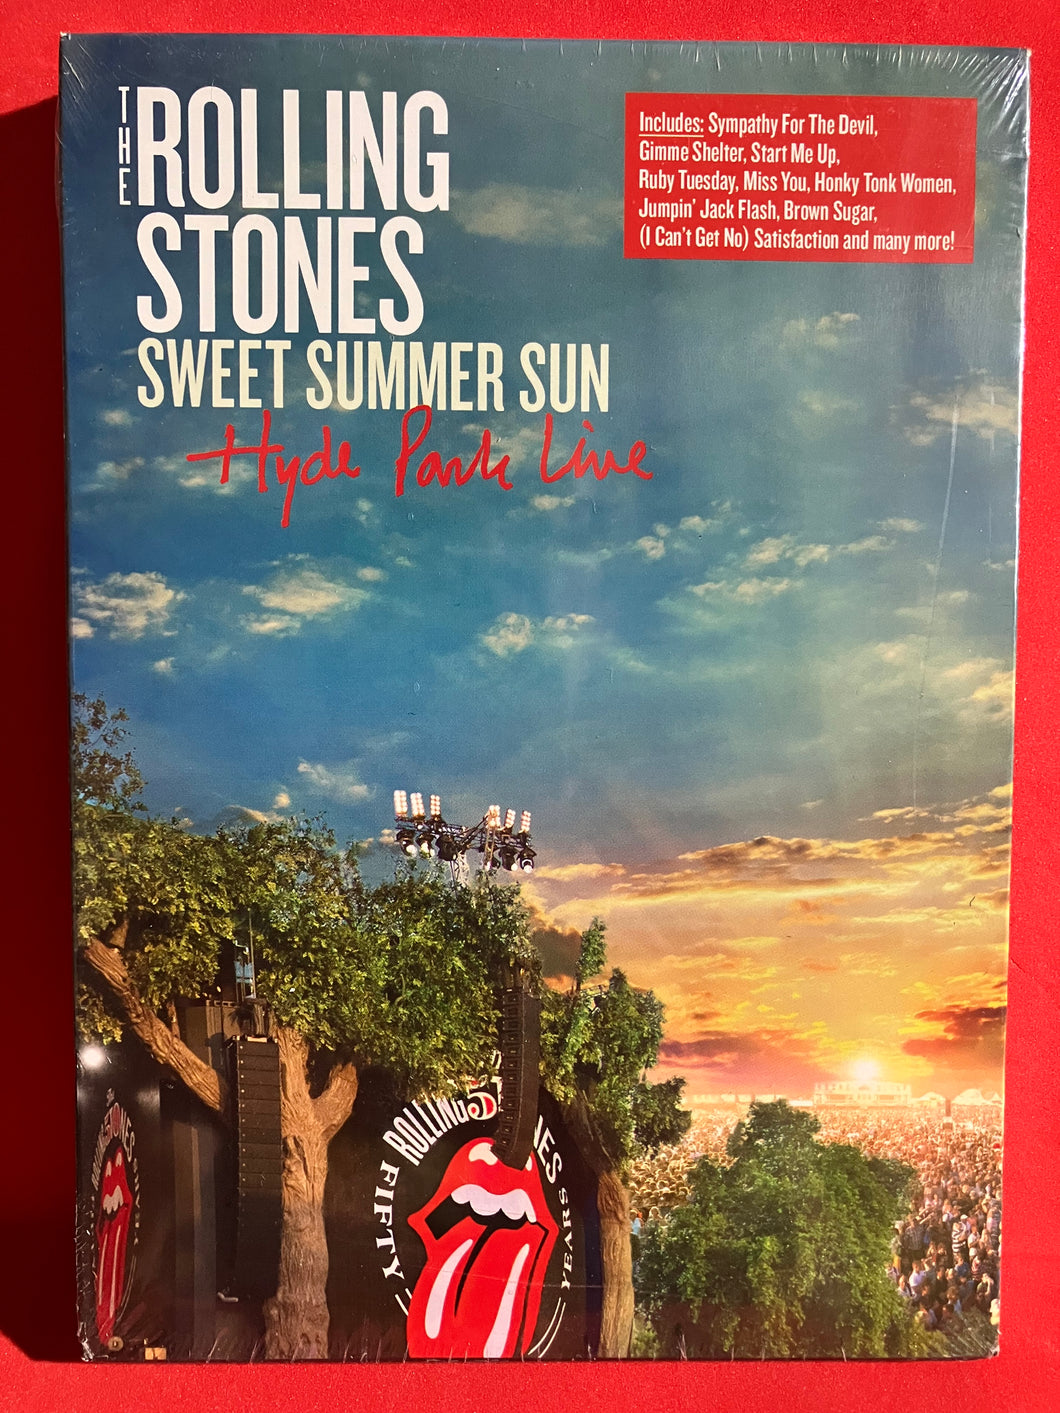 ROLLING STONES, THE - SWEET SUMMER SUN - HYDE PARK LIVE -  DVD (SEALED)